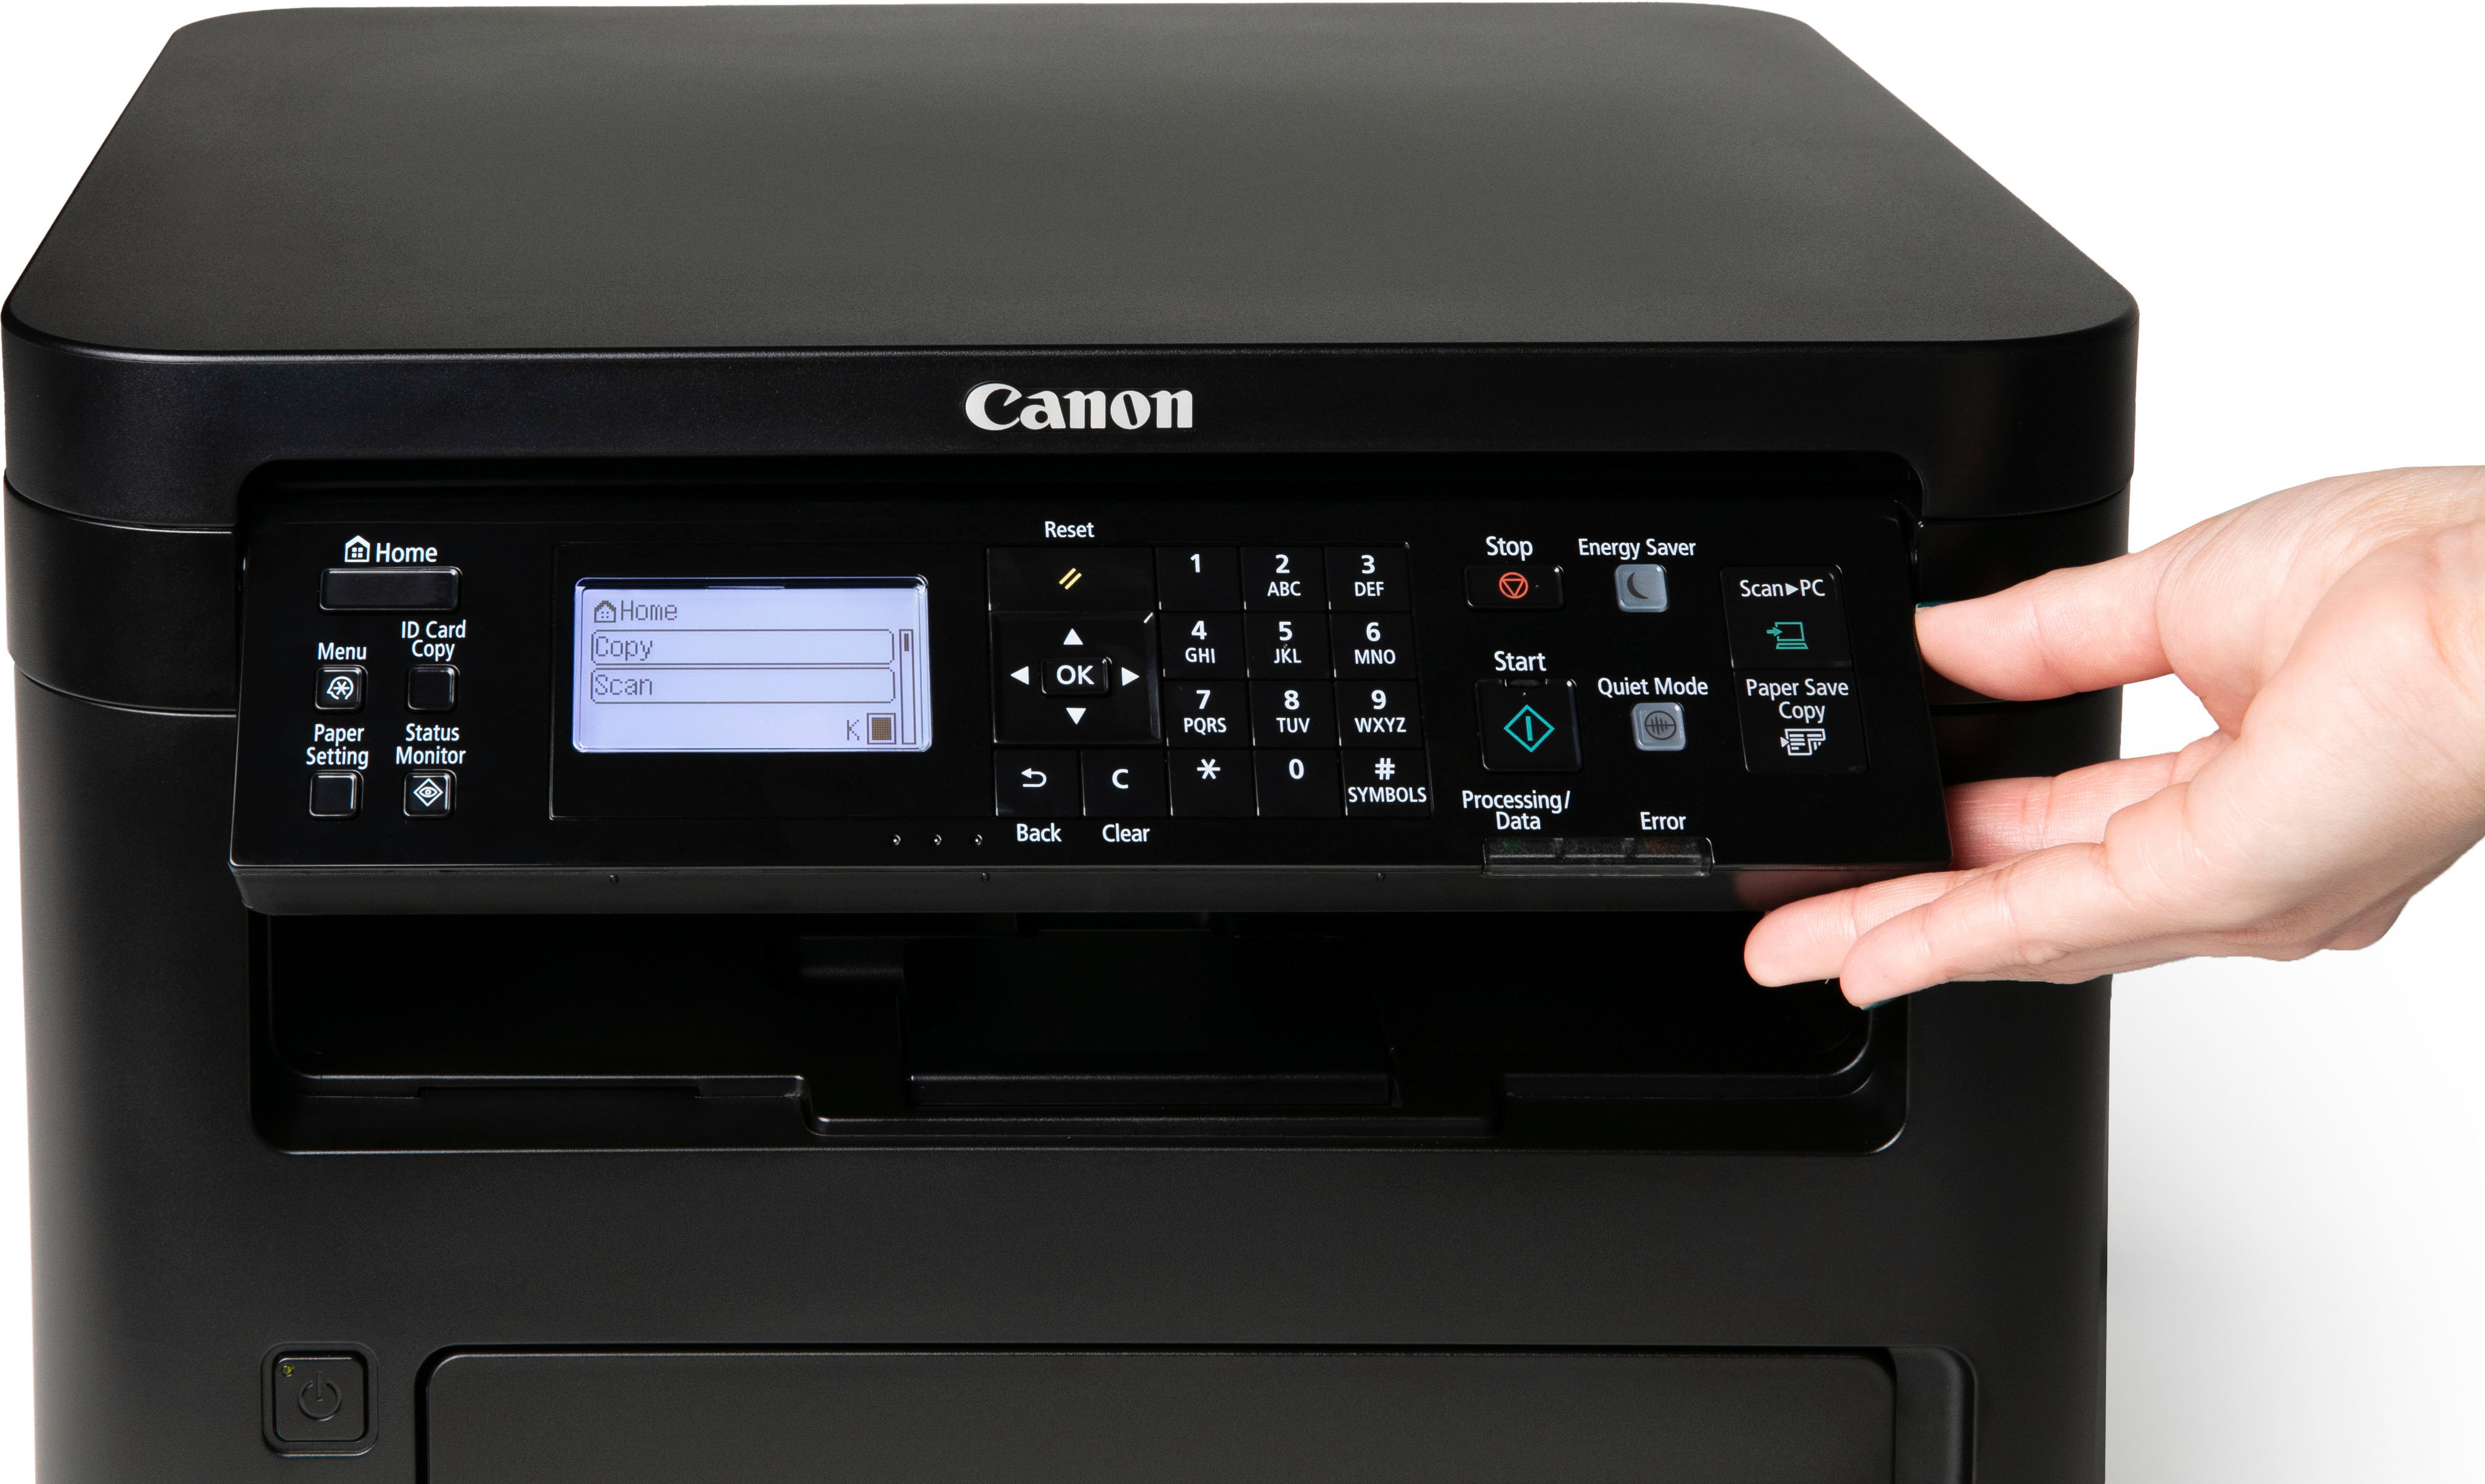 Angle View: Canon - imageCLASS MF262dw II Wireless Black-and-White All-In-One Laser Printer - Black